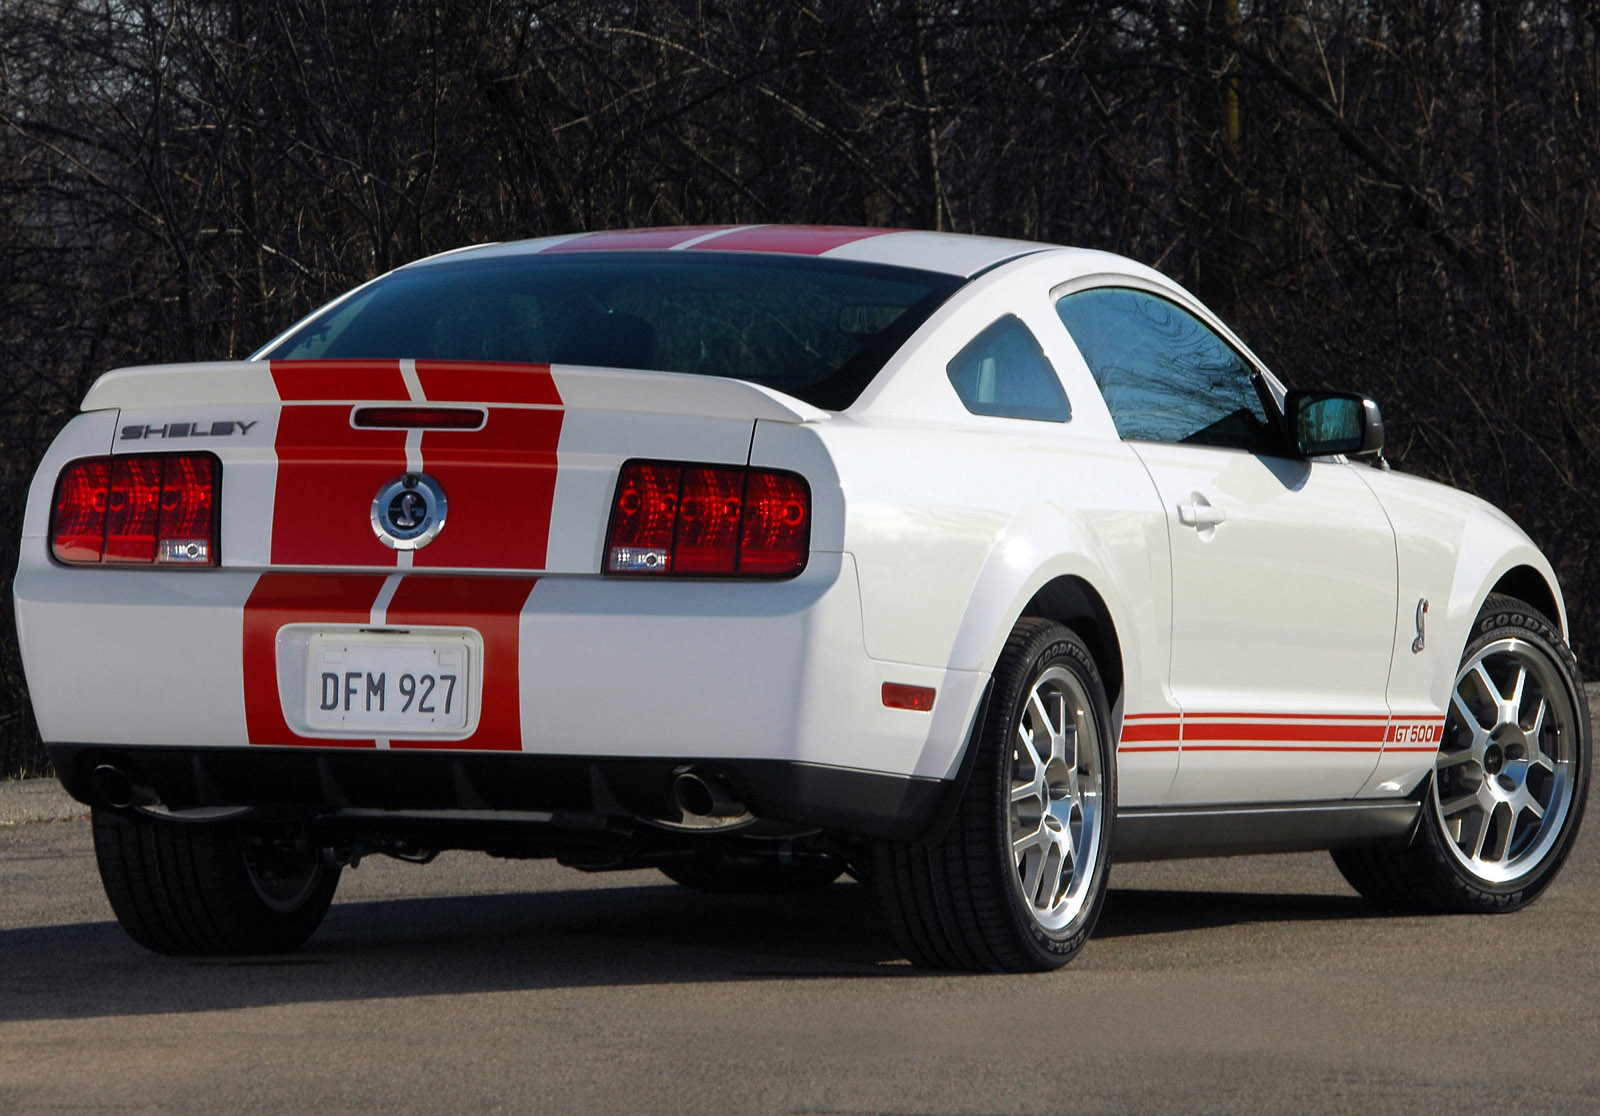 2007 Shelby Ford Mustang Gt500 Red Stripe Hd Pictures